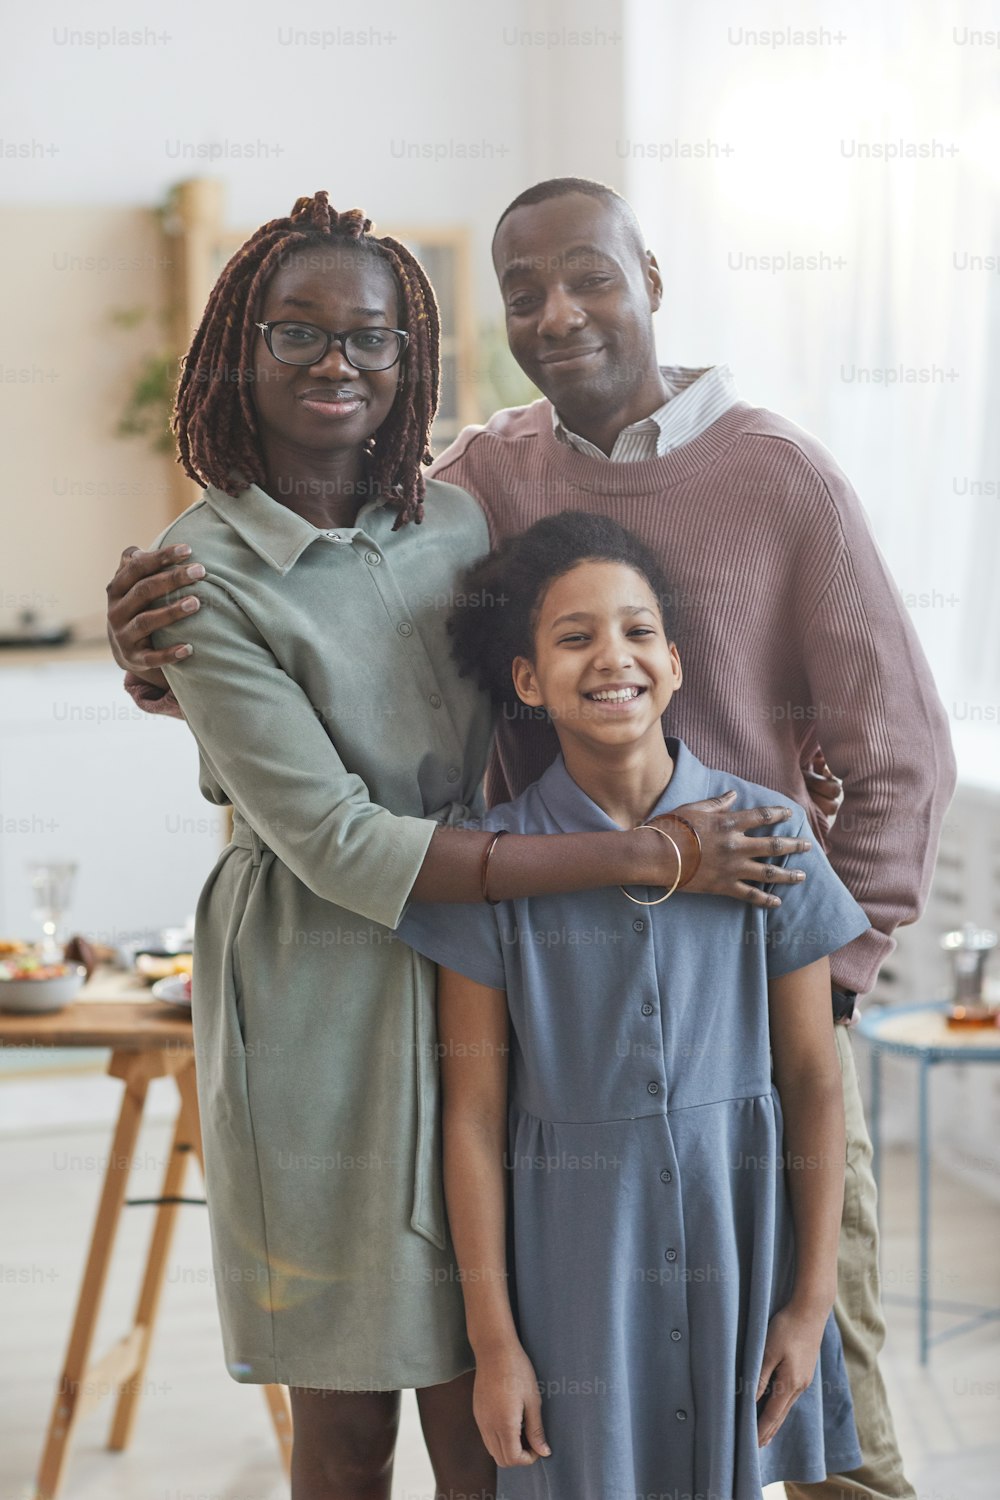 Vertical portrait of happy African-American family looking at camera while posing indoors in cozy home interior with dinner table in background